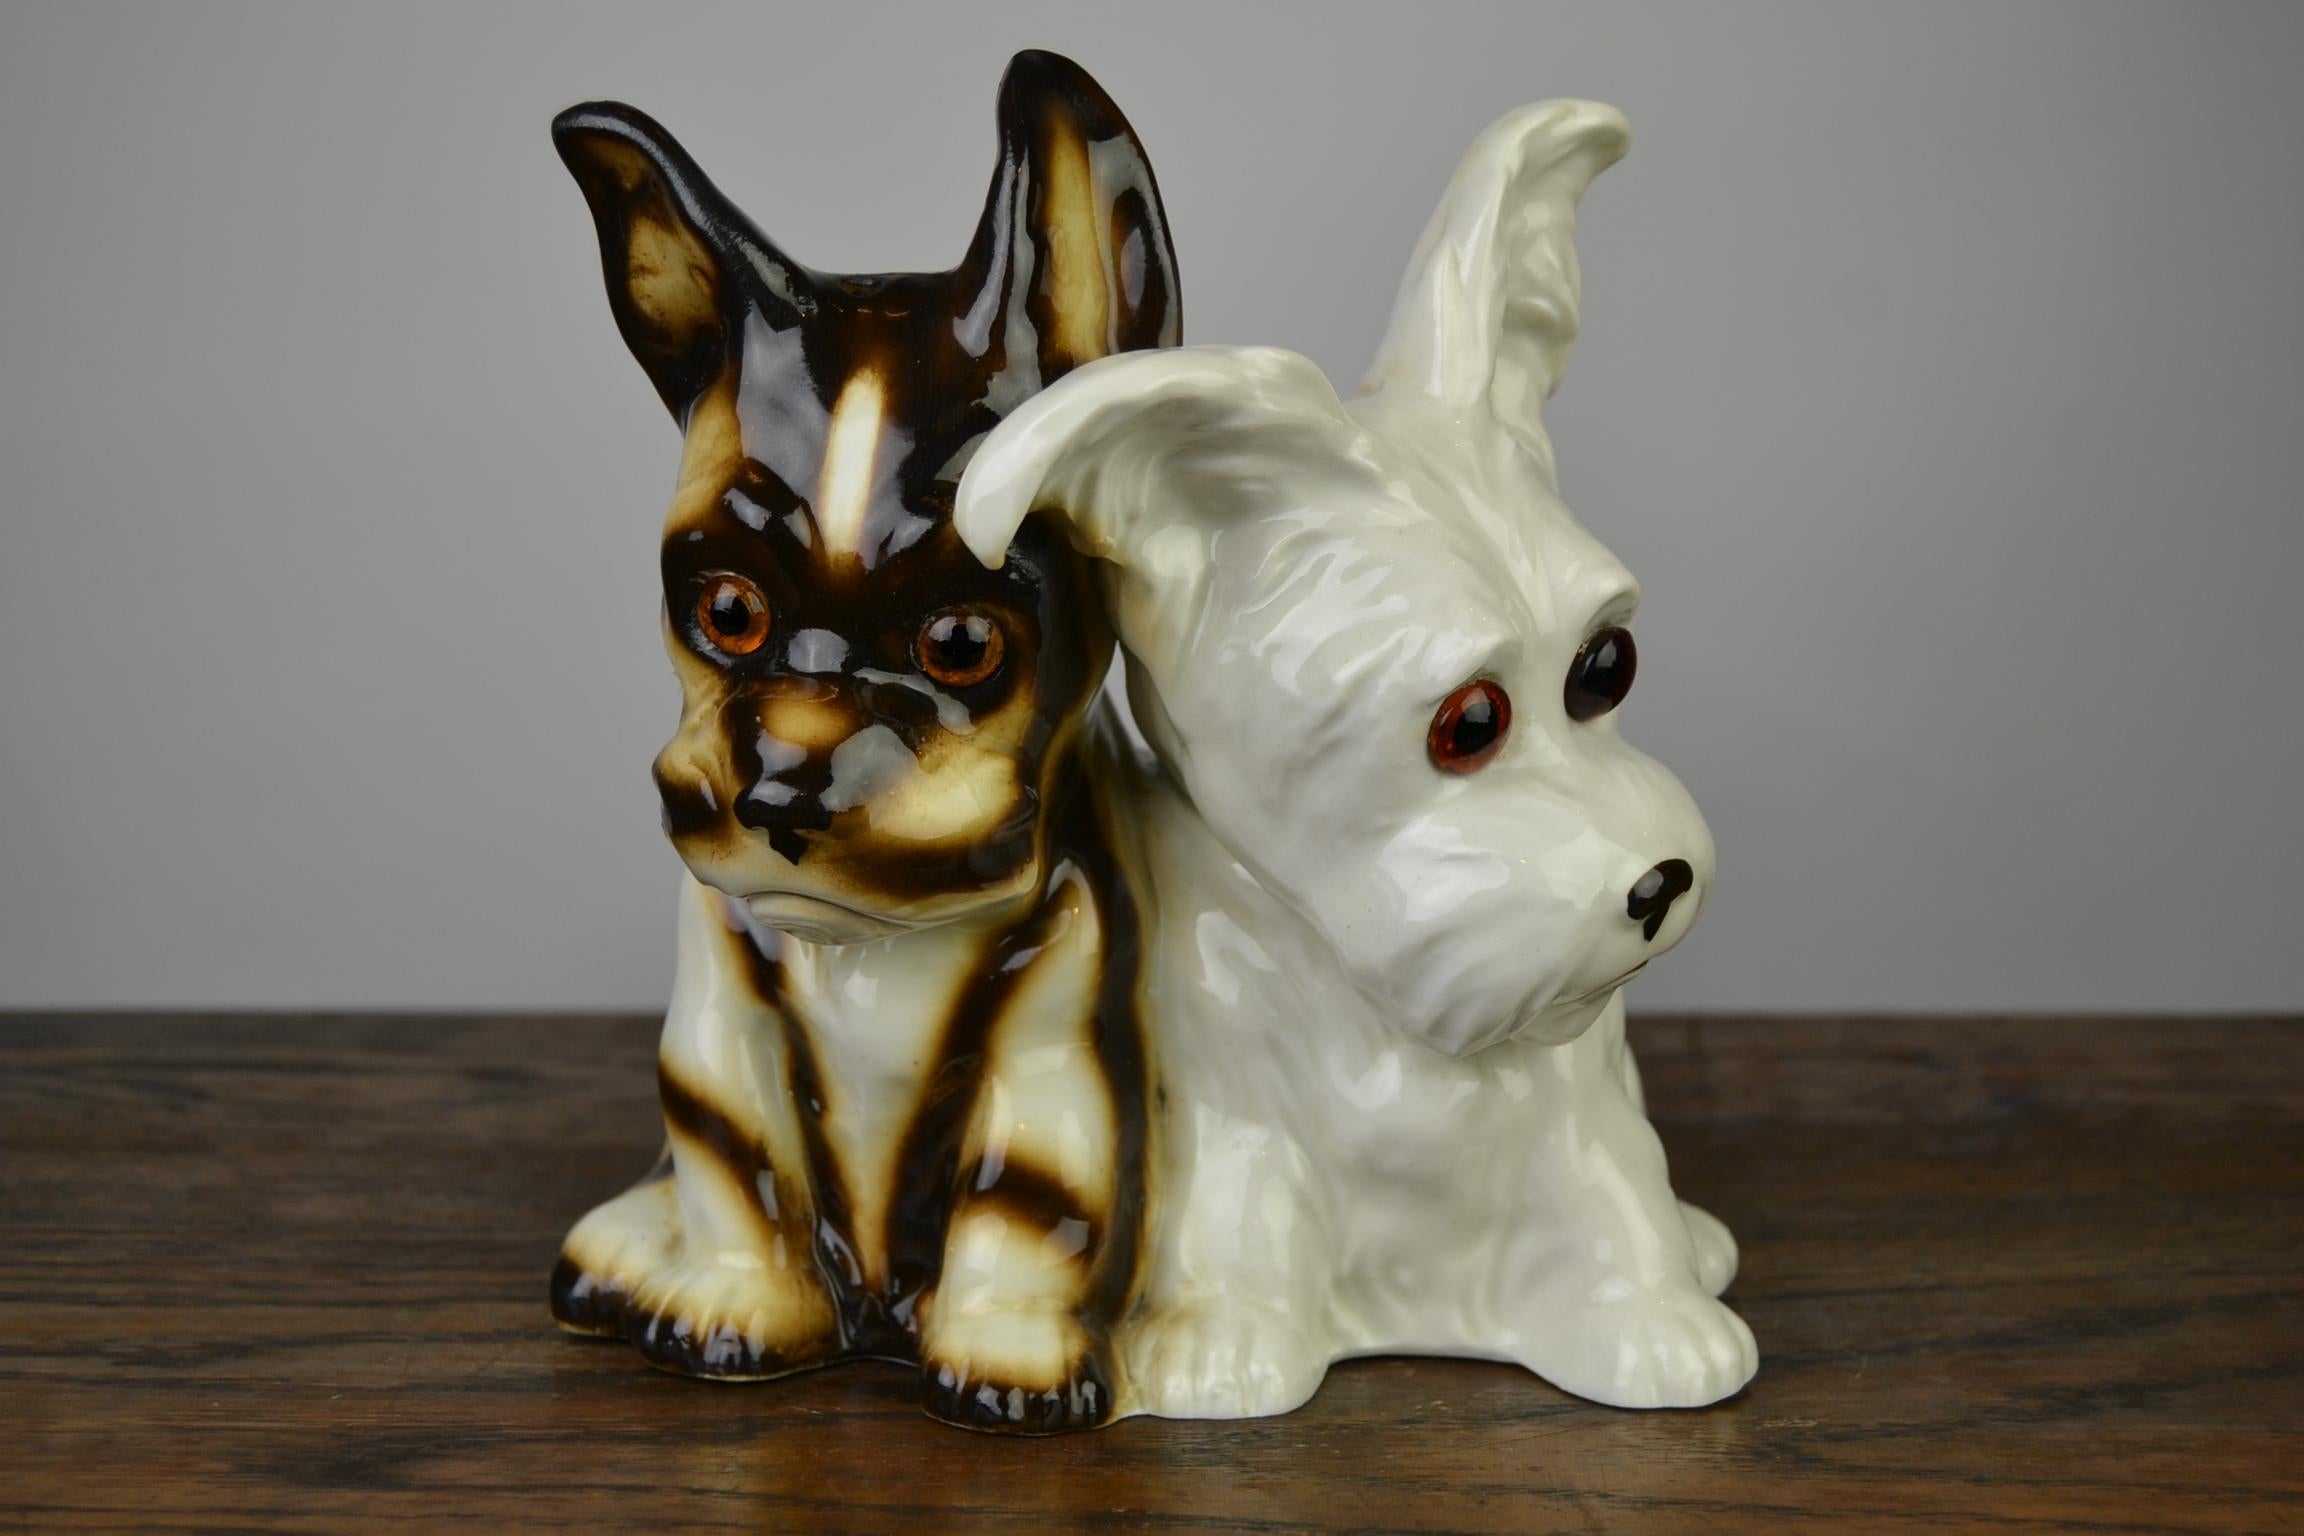 Great looking figural perfume lamp, a dual dog perfume light from the 1950s.
This Late Art Deco porcelain animal light - Table lamp is a cute dog statue - Dog figurine and was made in Germany.
The breed is a kind of Terrier Dog,
but the brown dog